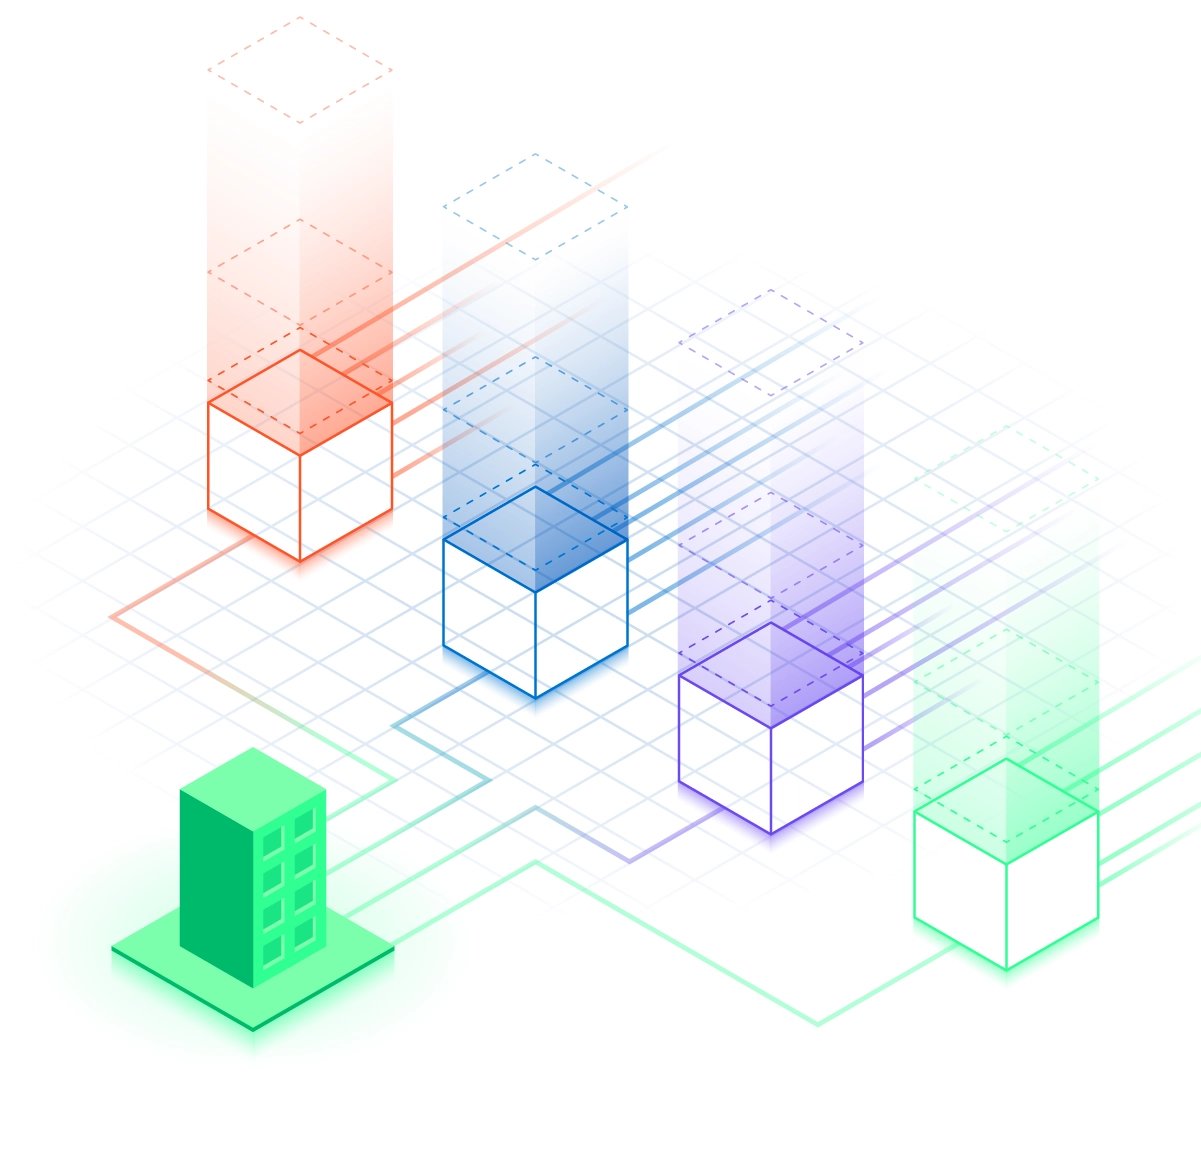 Multi-colored isometric illustration of enterprise building connecting to four boxes